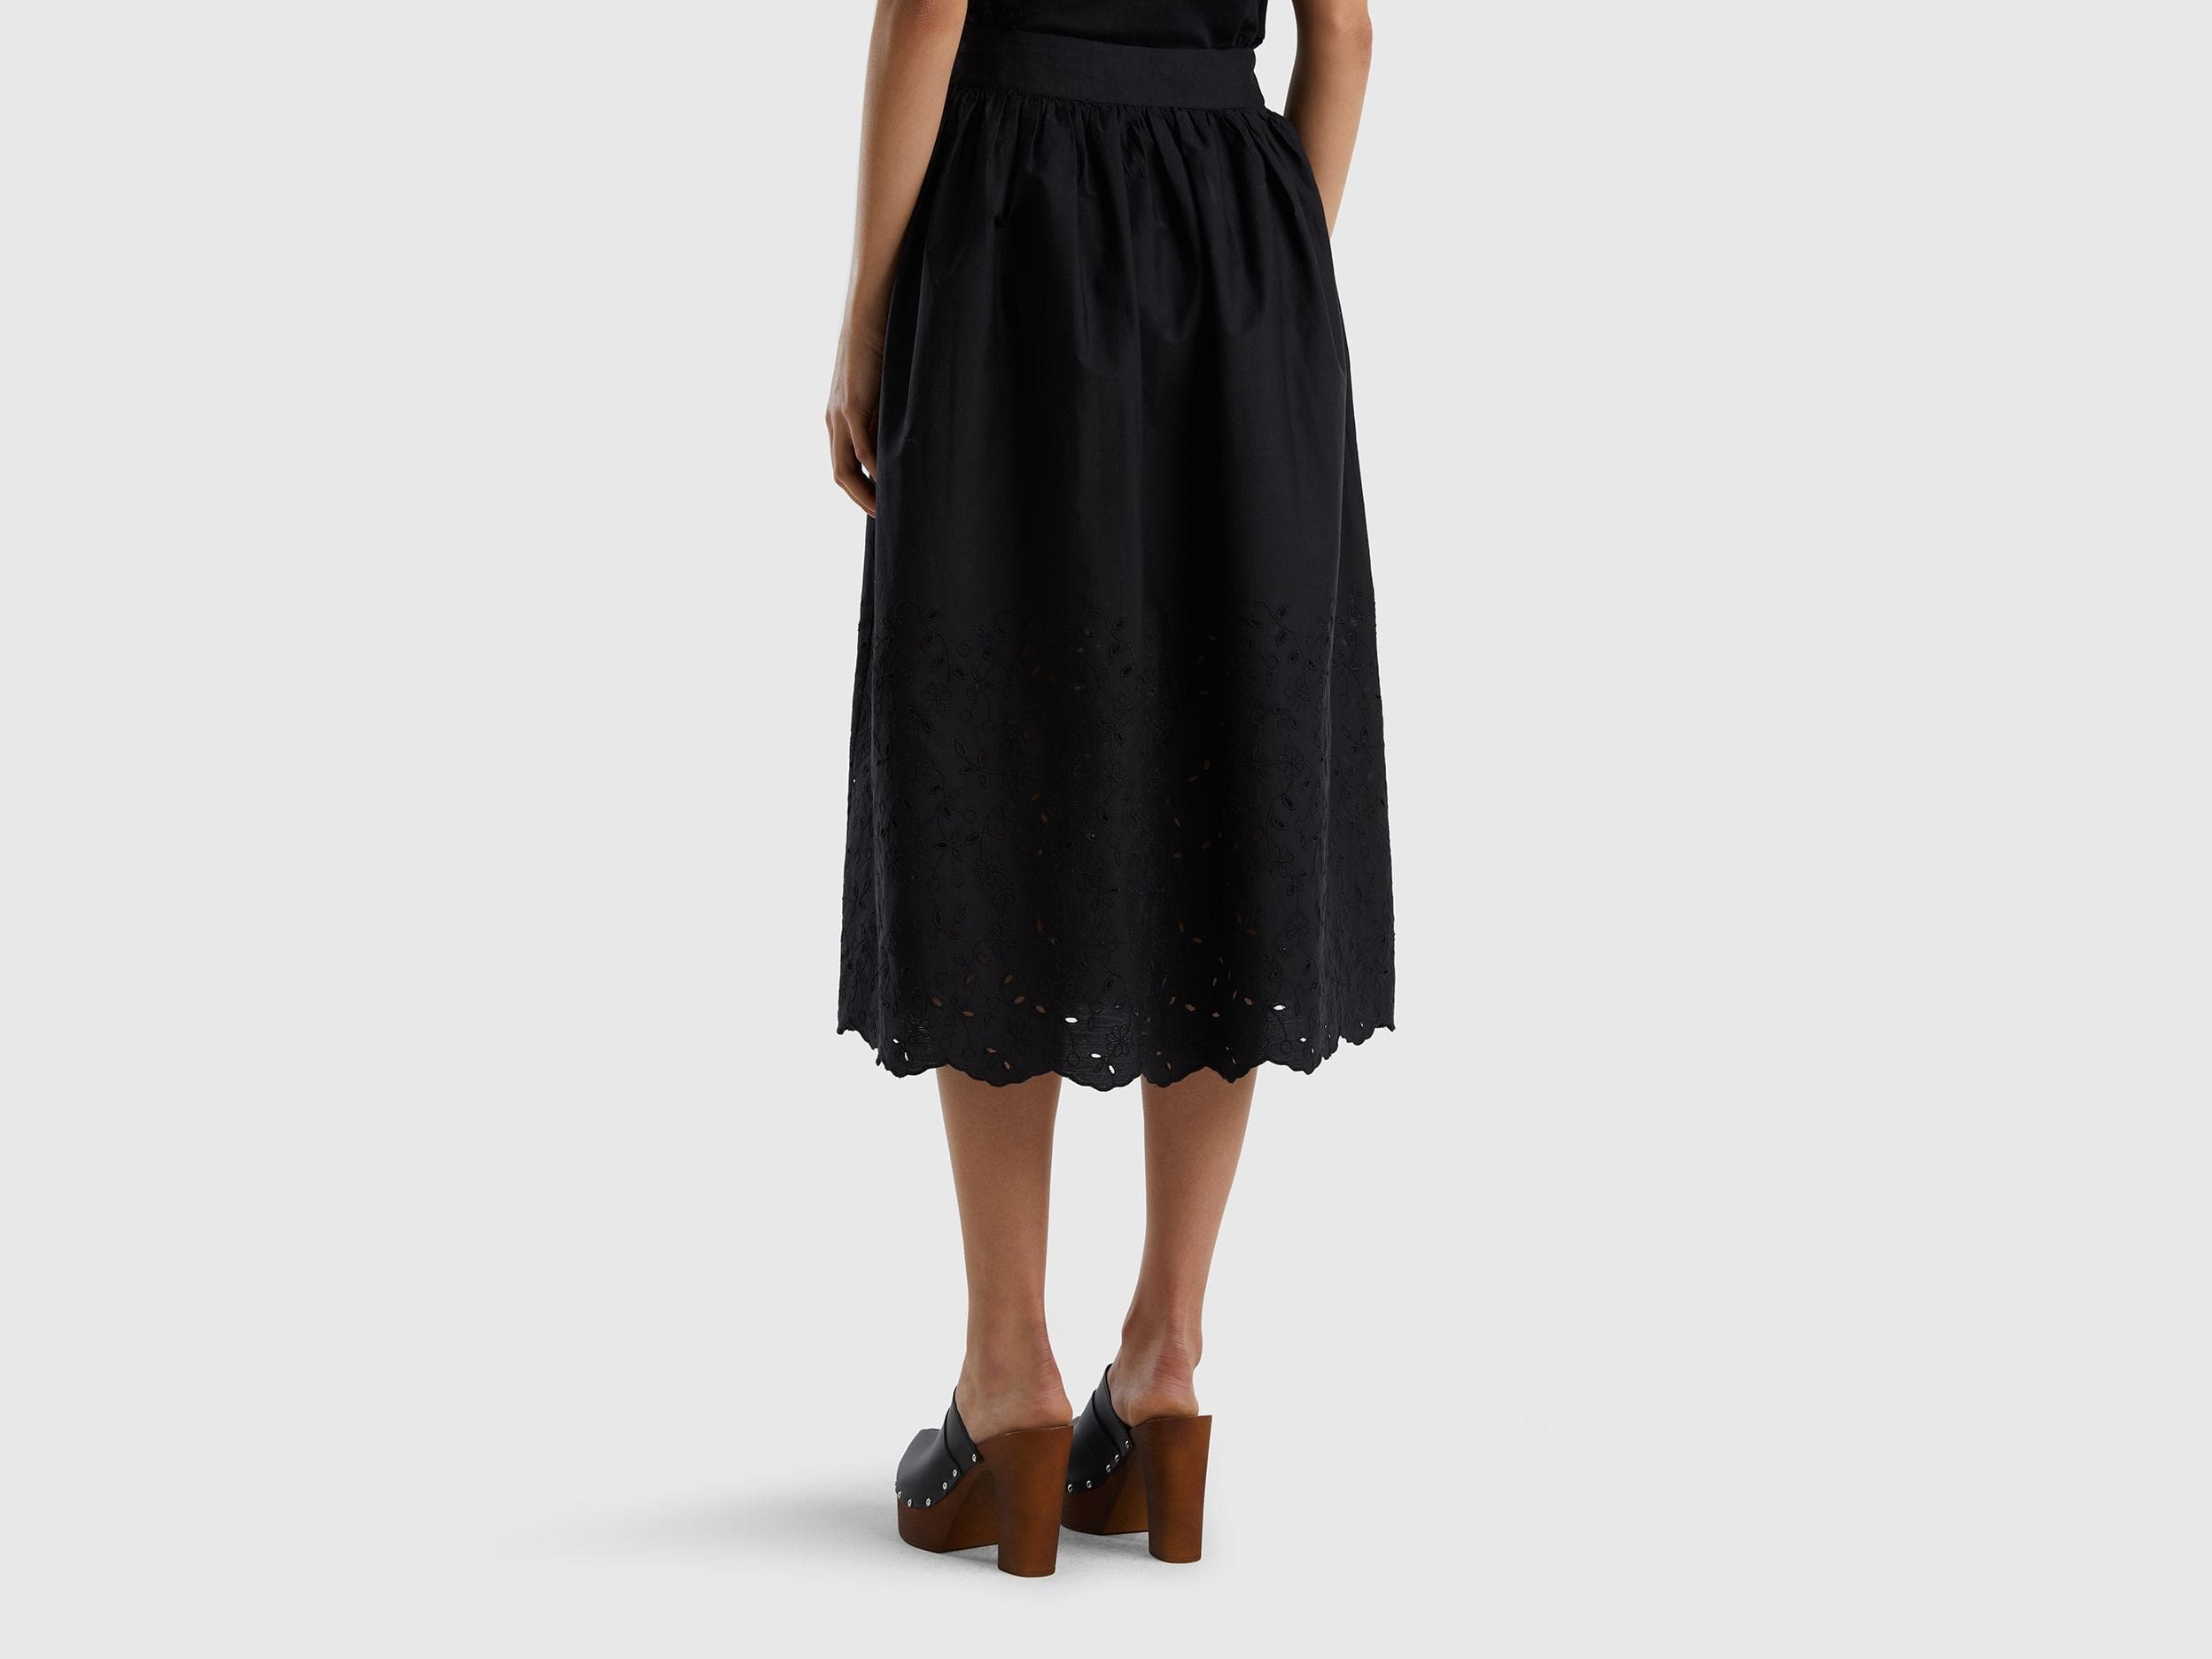 Midi skirt with broderie anglaise embroidery